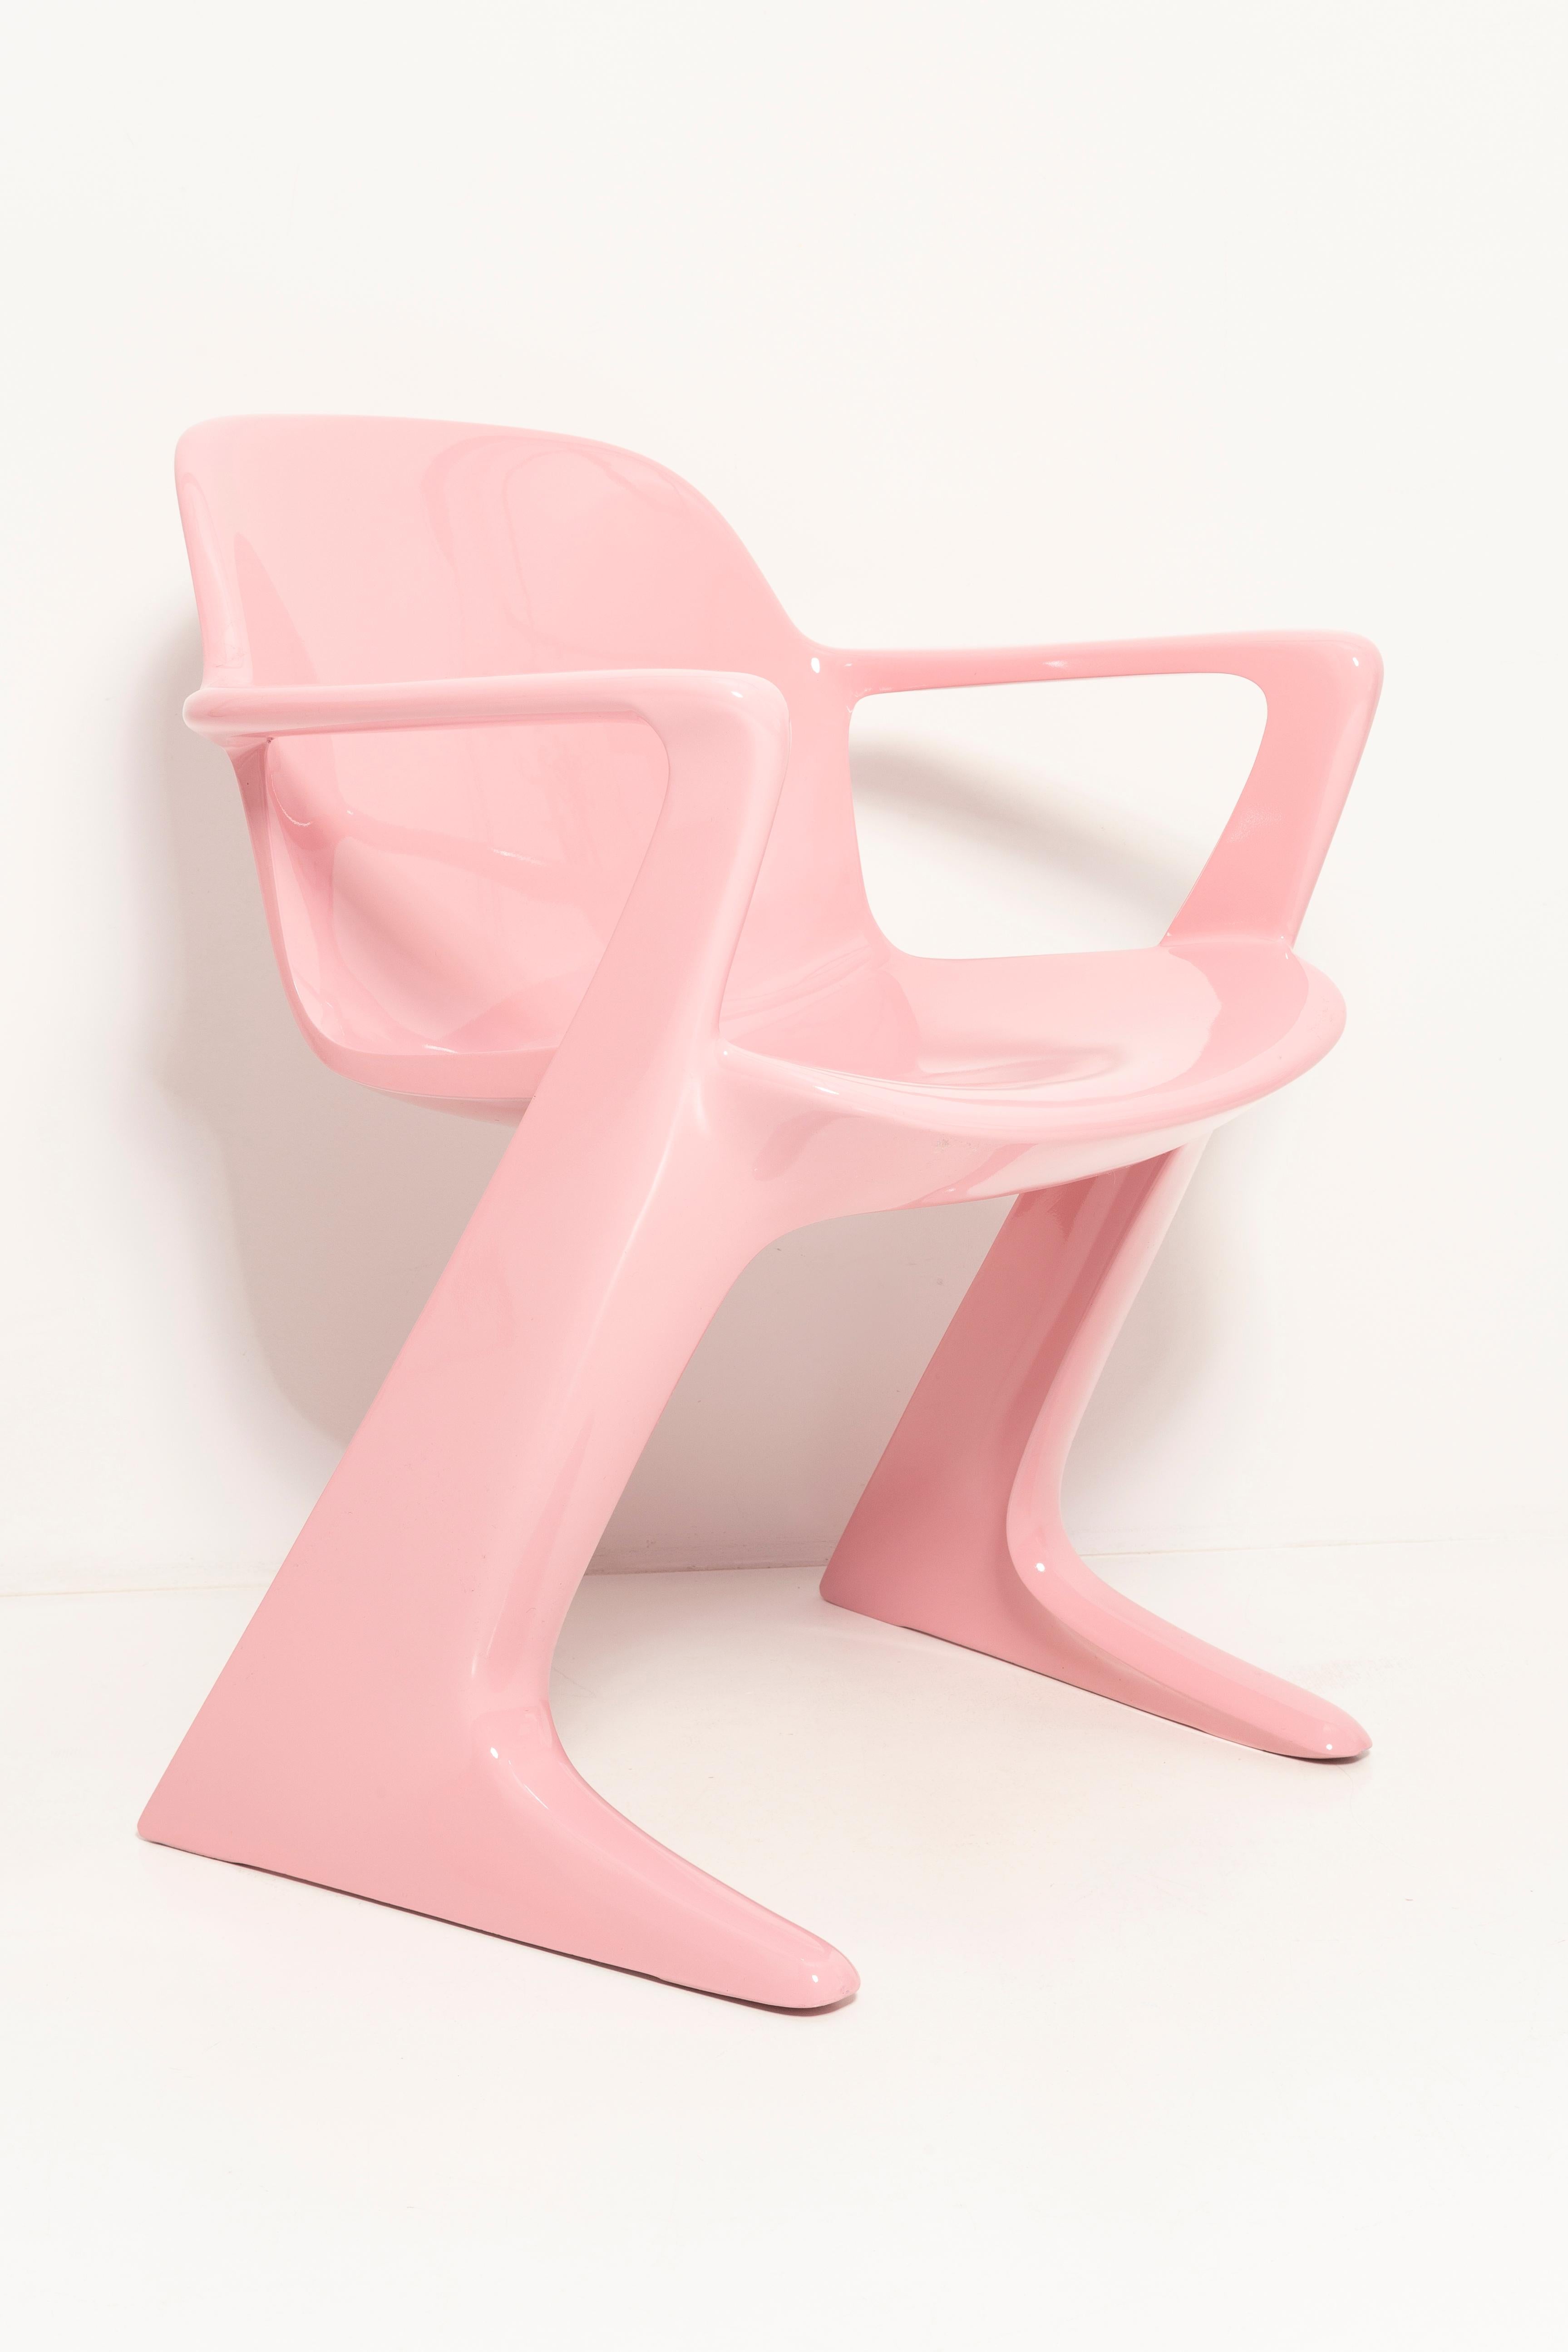 Lacquered Mid-Century Light Pink Kangaroo Chair Designed by Ernst Moeckl, Germany, 1968 For Sale